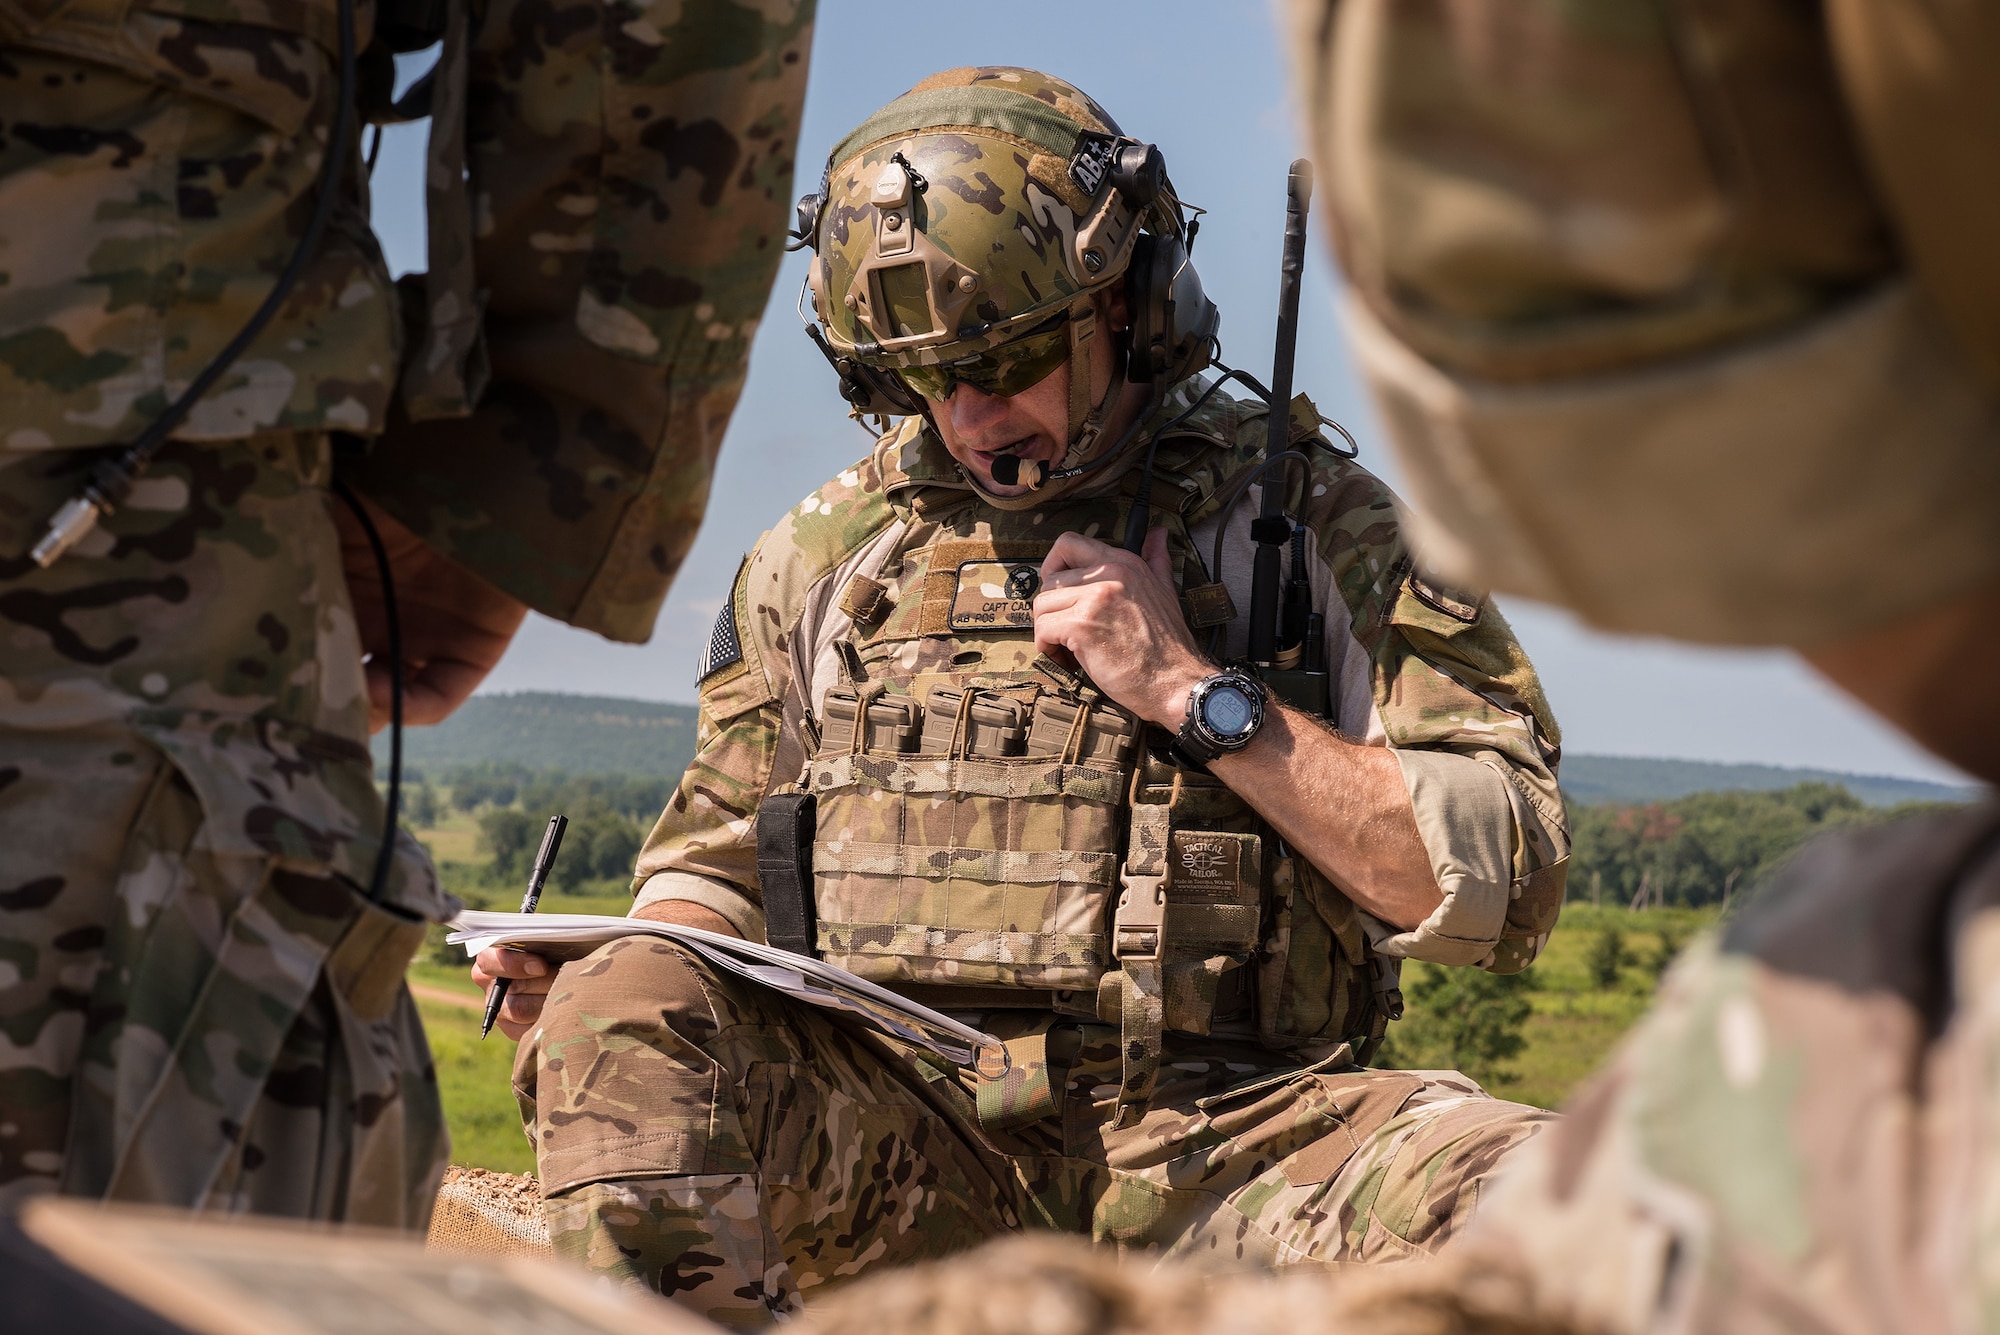 Capt. Christopher Cadieux, a 146th Air Support Operations Squadron air liaison officer from Will Rogers Air National Guard Base, Oklahoma City, calls in coordinates during a training event at Razorback Range, Fort Chaffee Maneuver Training Center in Fort Smith, Ark., and Hog Military Operating Area, Mansfield, Ark., July 11, 2017. The close air support training event, called Sooner Strike, was coordinated by the 146 ASOS and enabled Airmen in the air and on the ground to share techniques and accomplish both mission qualification training and continuation training with several aircraft common to TACP missions. (U.S Air National Guard photo by Senior Master Sgt. Andrew M. LaMoreaux)